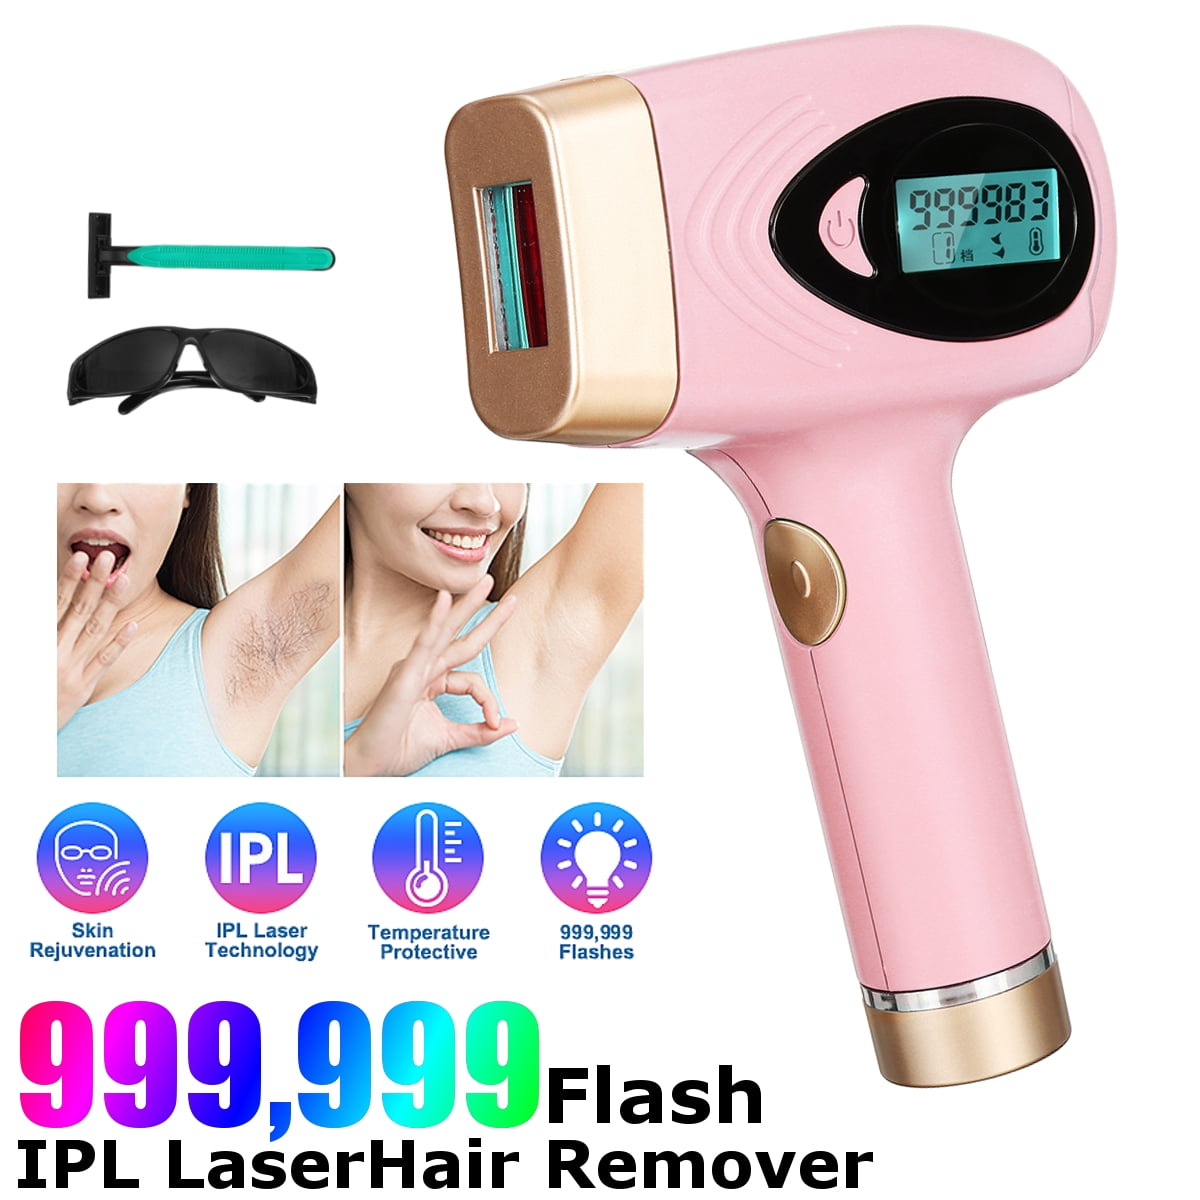 Painless Ipl Laser Hair Removal Permanent Pulse Hair Removal Device 9 Levels System Instrument Household Face Leg Body Skin For Lip Hair Armpit Hair Arms Legs Forehead Hairline Bikini Hair